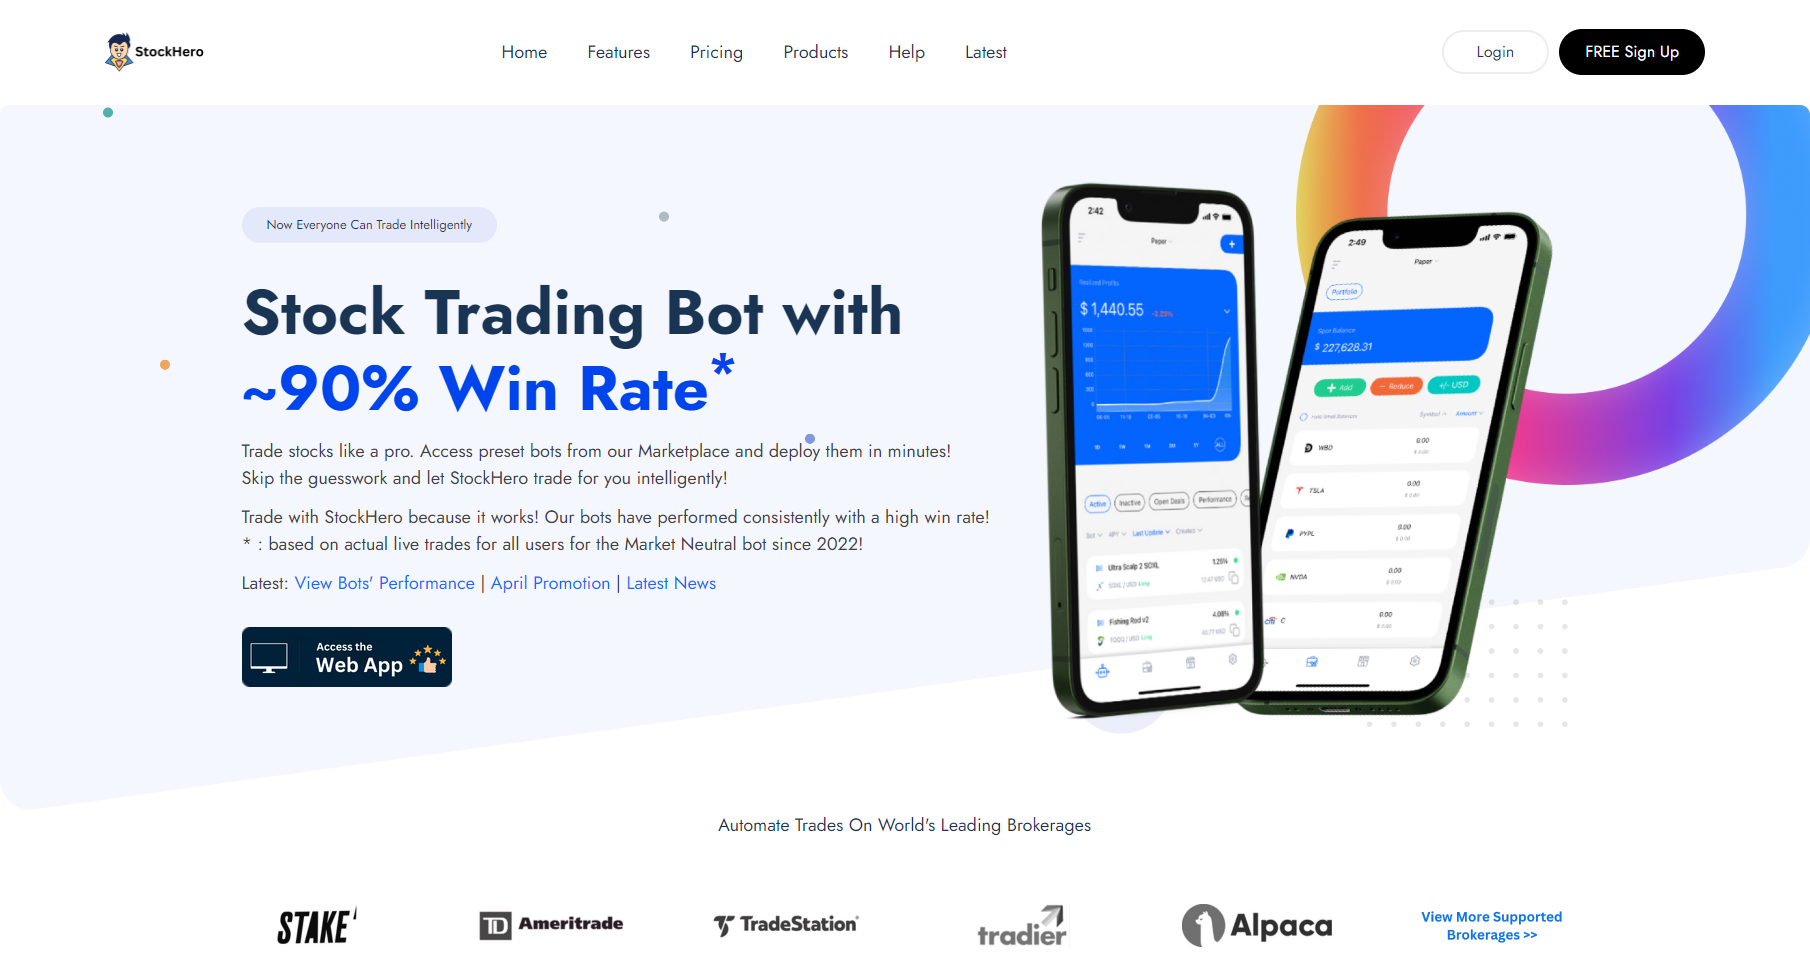 Automate Your Trades, Maximize Your Gains